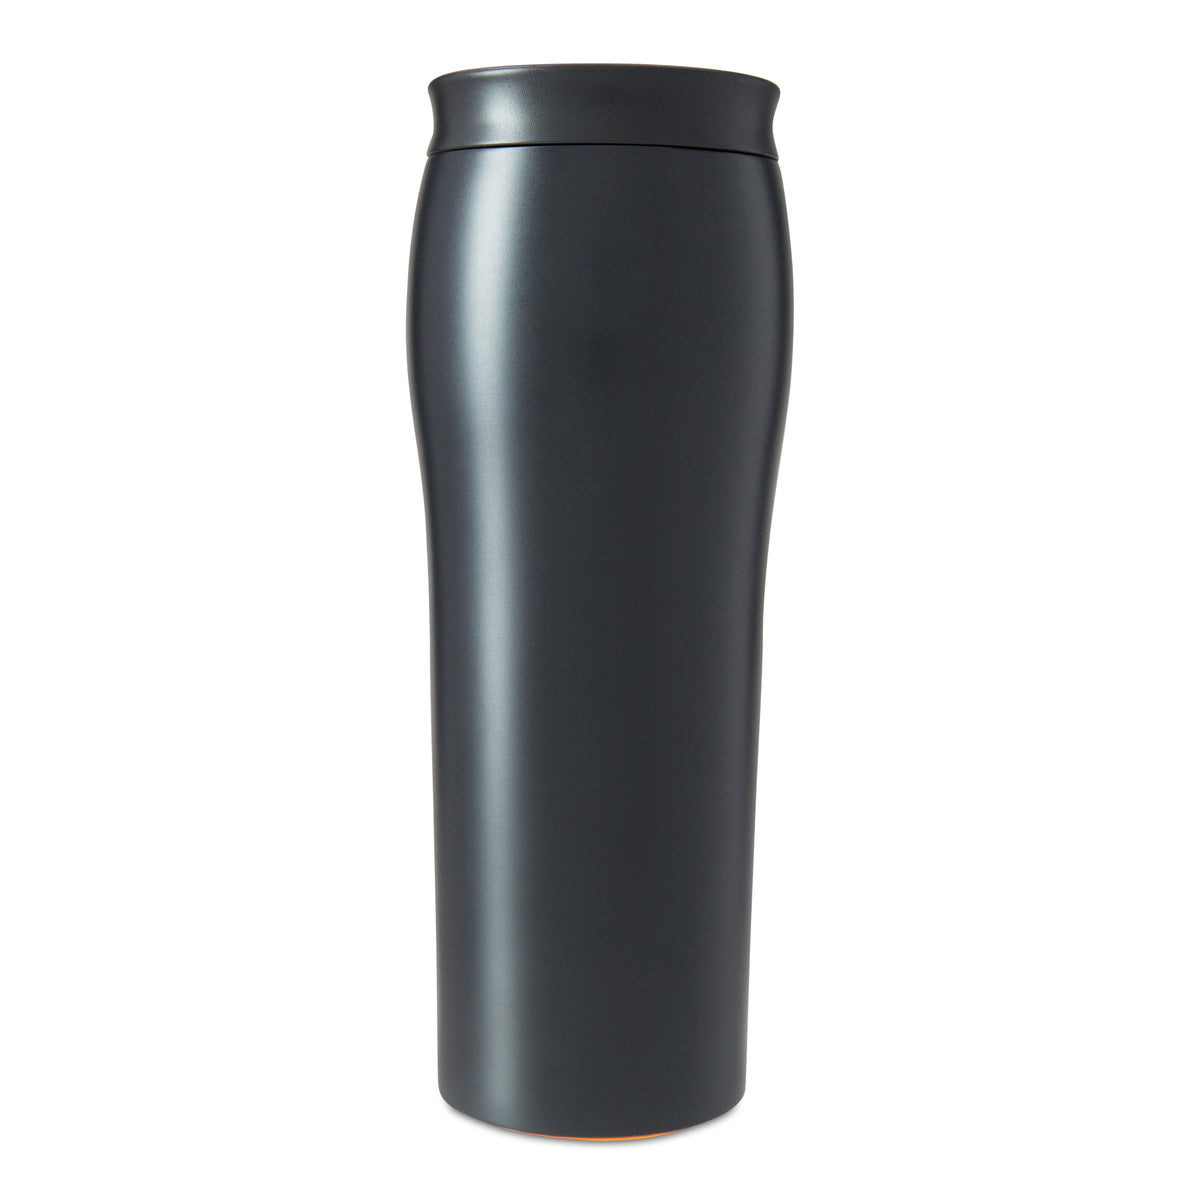  Matte Black Tumbler - Coffee Mug - Travel Mug - Double Wall  Stainless Steel Cup with straw, 16oz : Home & Kitchen